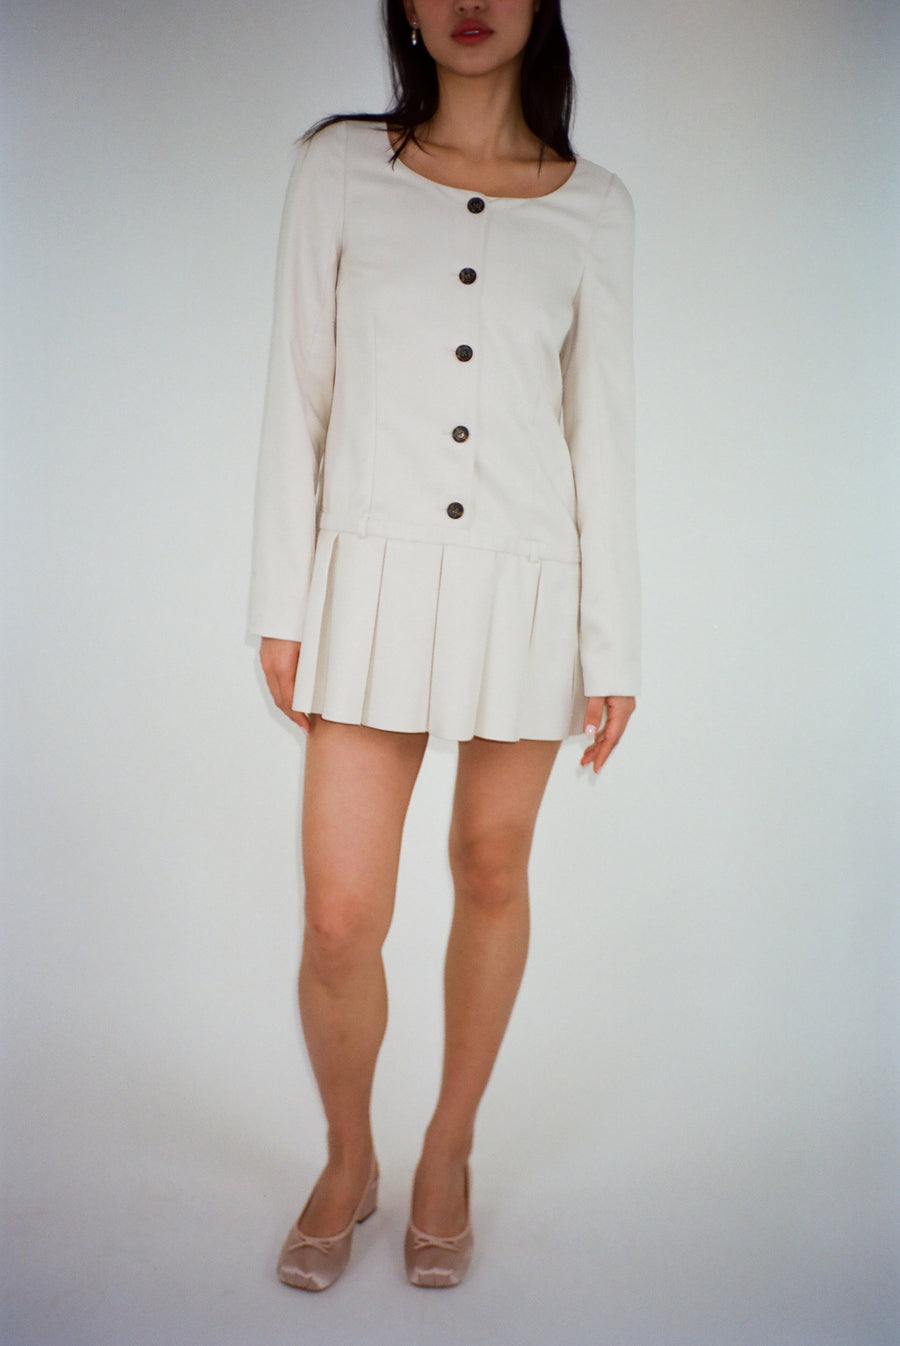 Long sleeve mini dress in off white suting with buttons and pleats on model